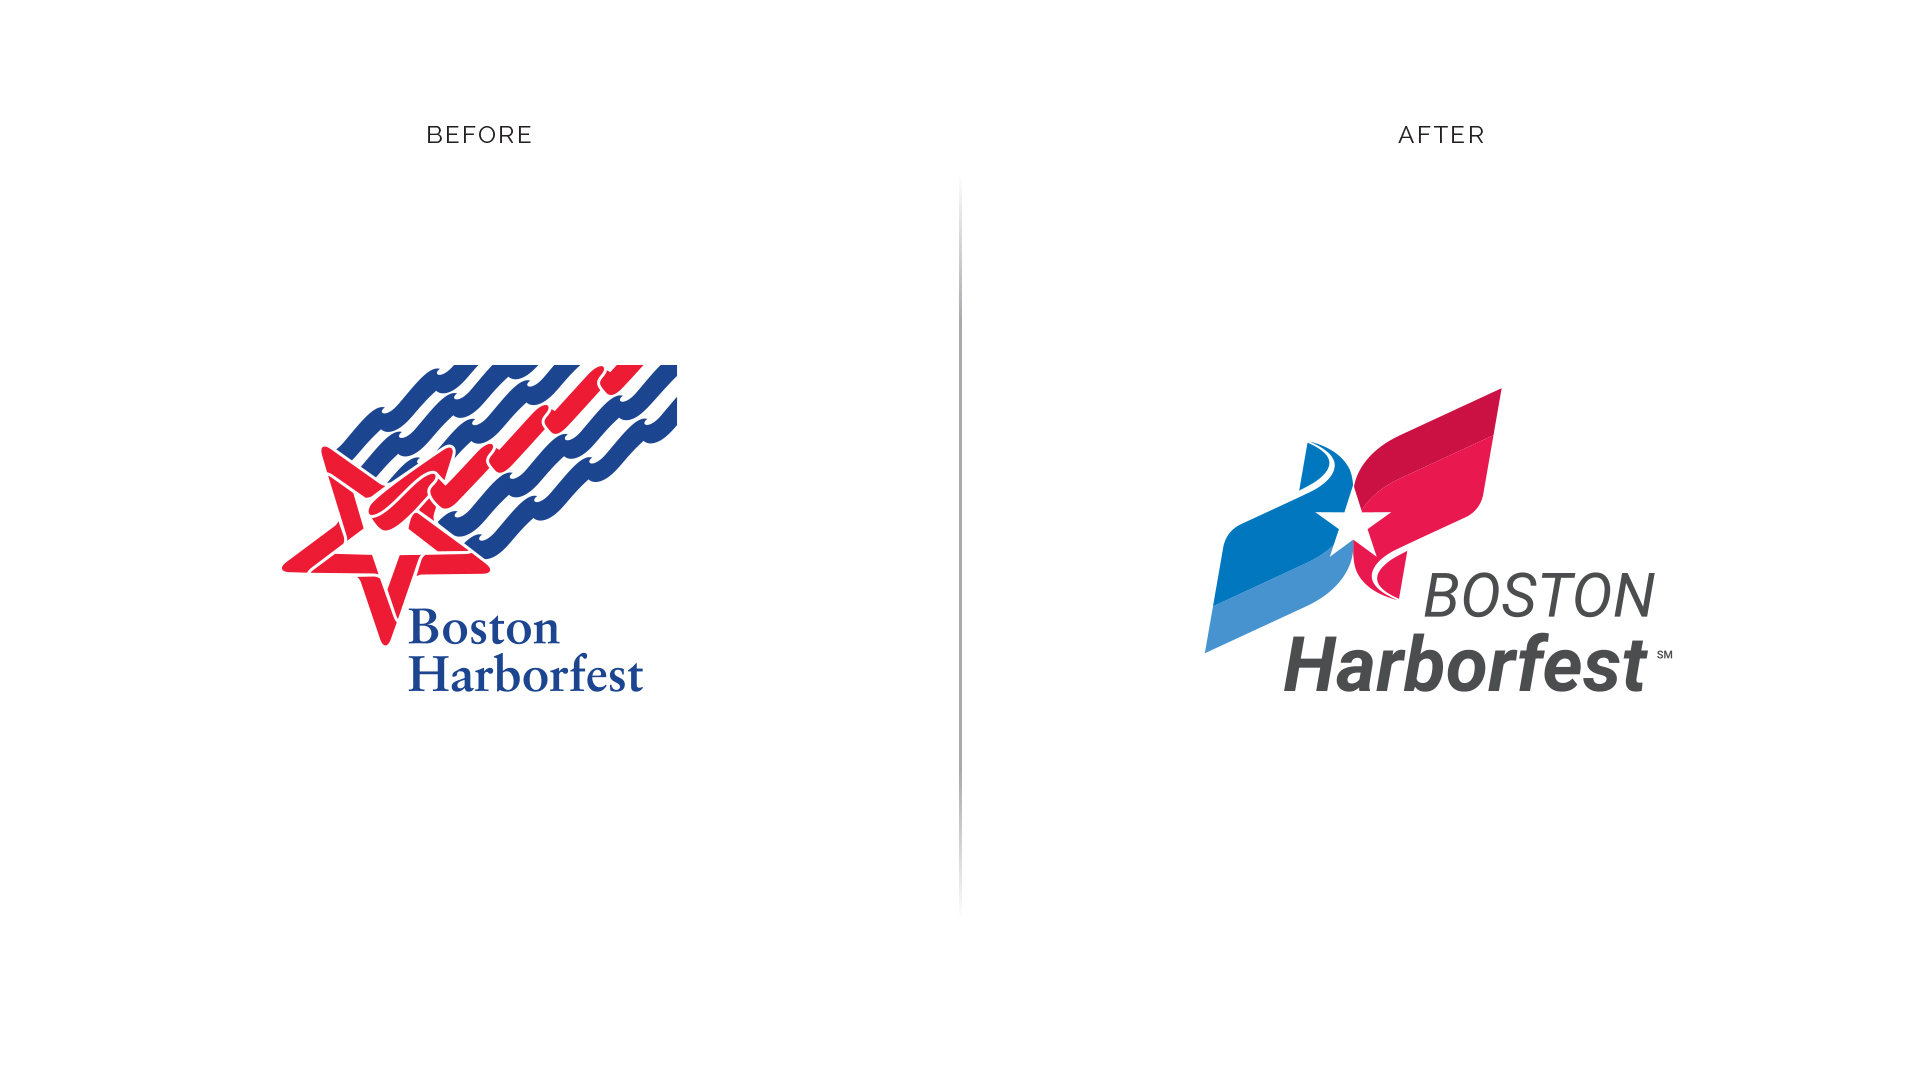 Before-After_logos-1-1.jpg